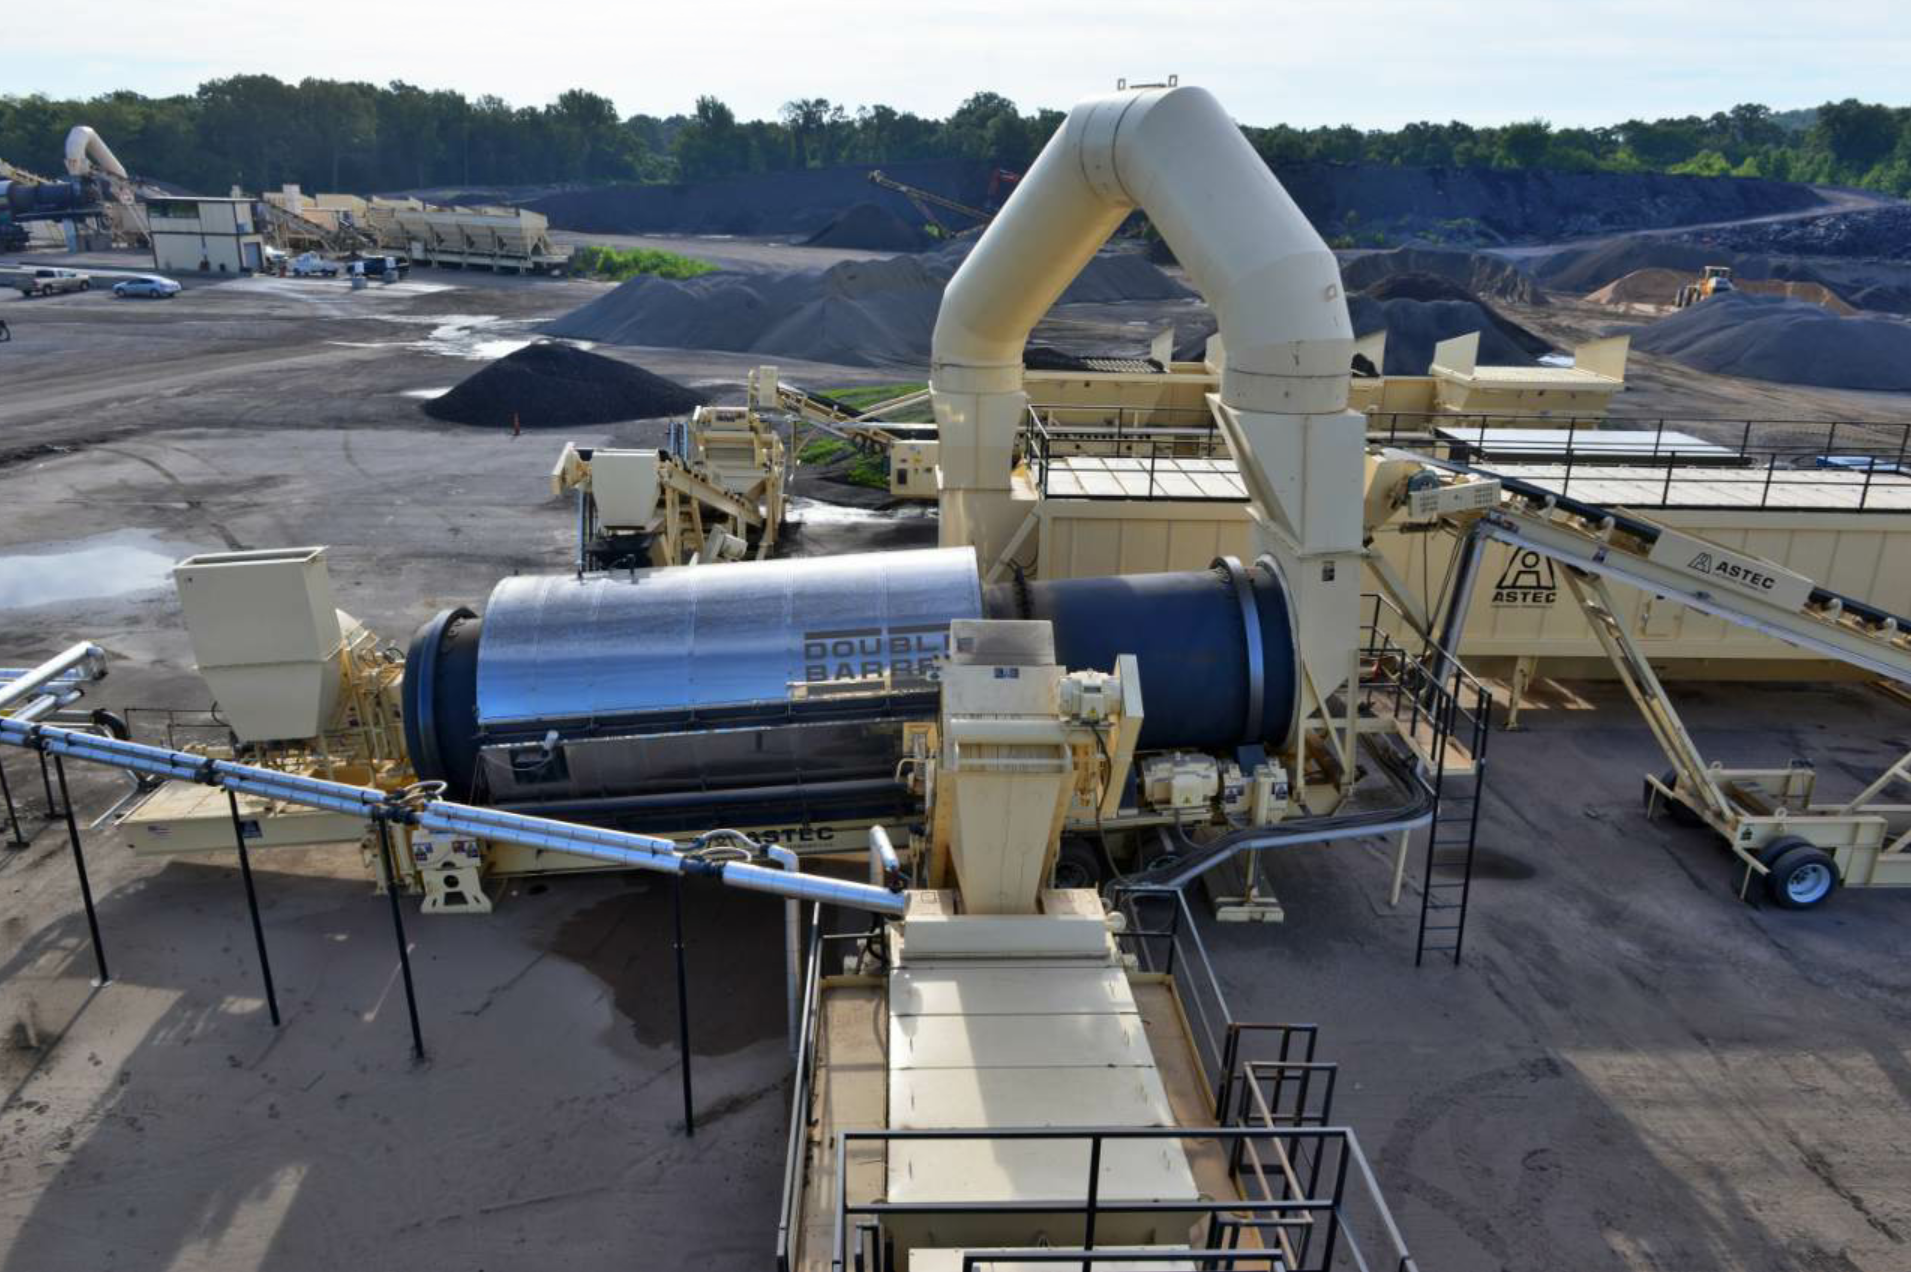 Blackstone Construction’s new plant includes the extended Double Barrel, pictured here in the foreground, to allow increased RAP percentages in mix production. All photos courtesy Astec Industries, Chattanooga, Tennessee. Caption for image saved as RAP RAS Feeds